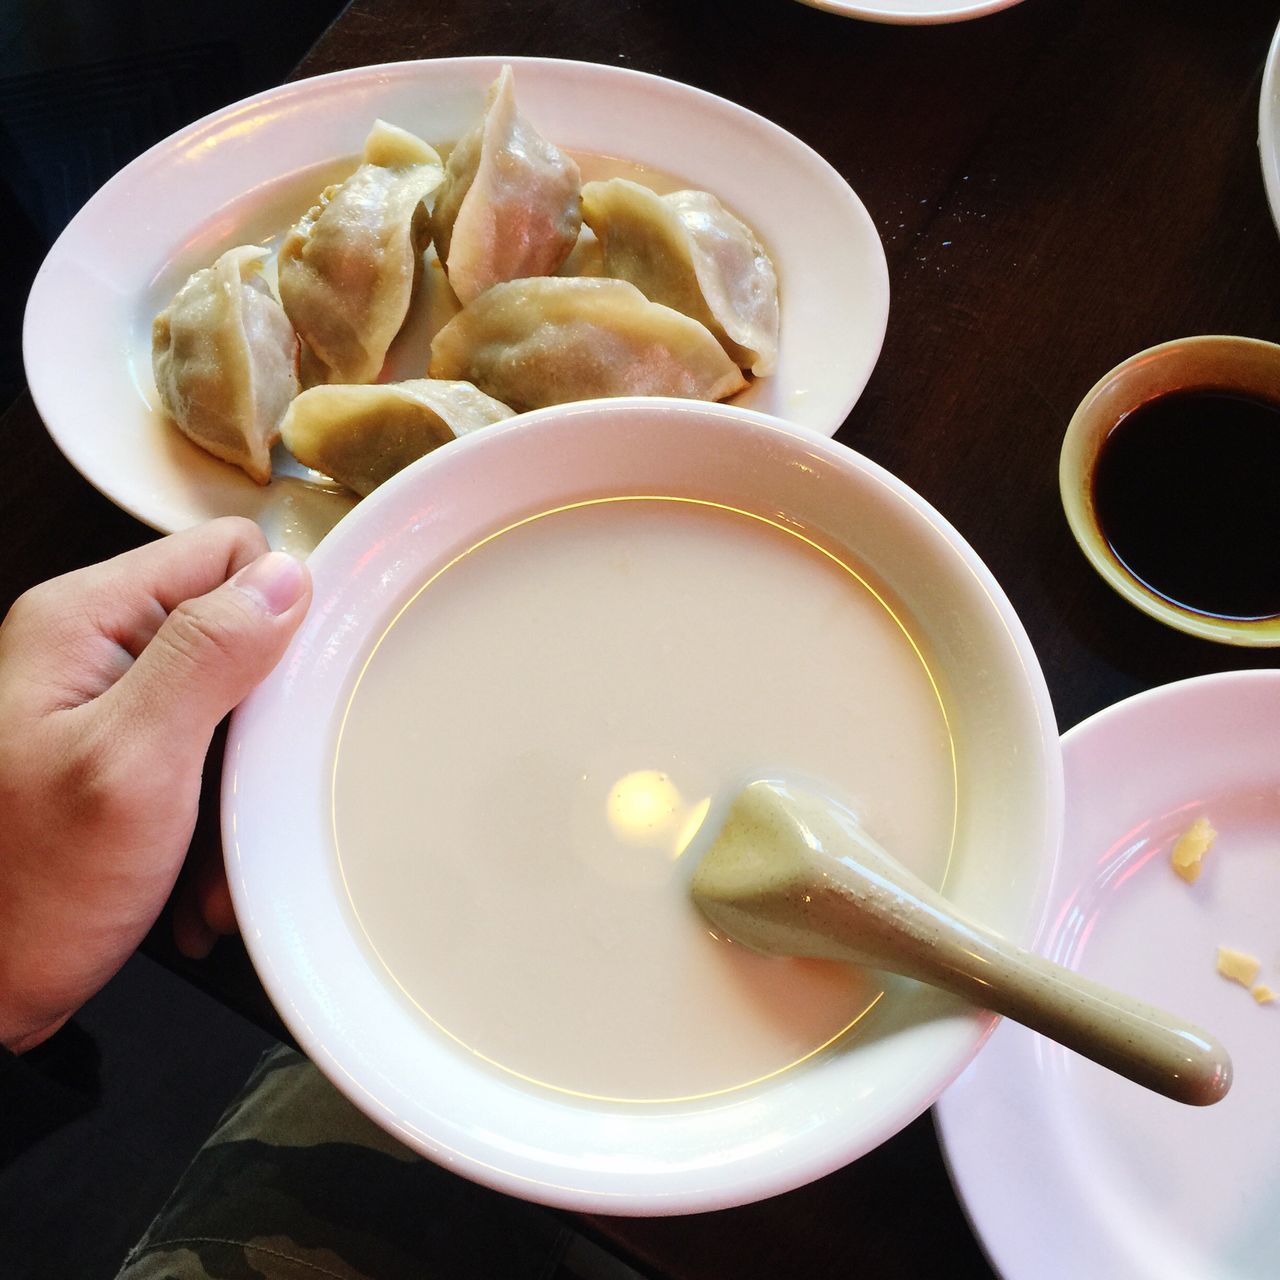 food and drink, human hand, holding, food, real people, human body part, freshness, one person, bowl, indoors, dumpling, healthy eating, plate, lifestyles, ready-to-eat, close-up, day, people